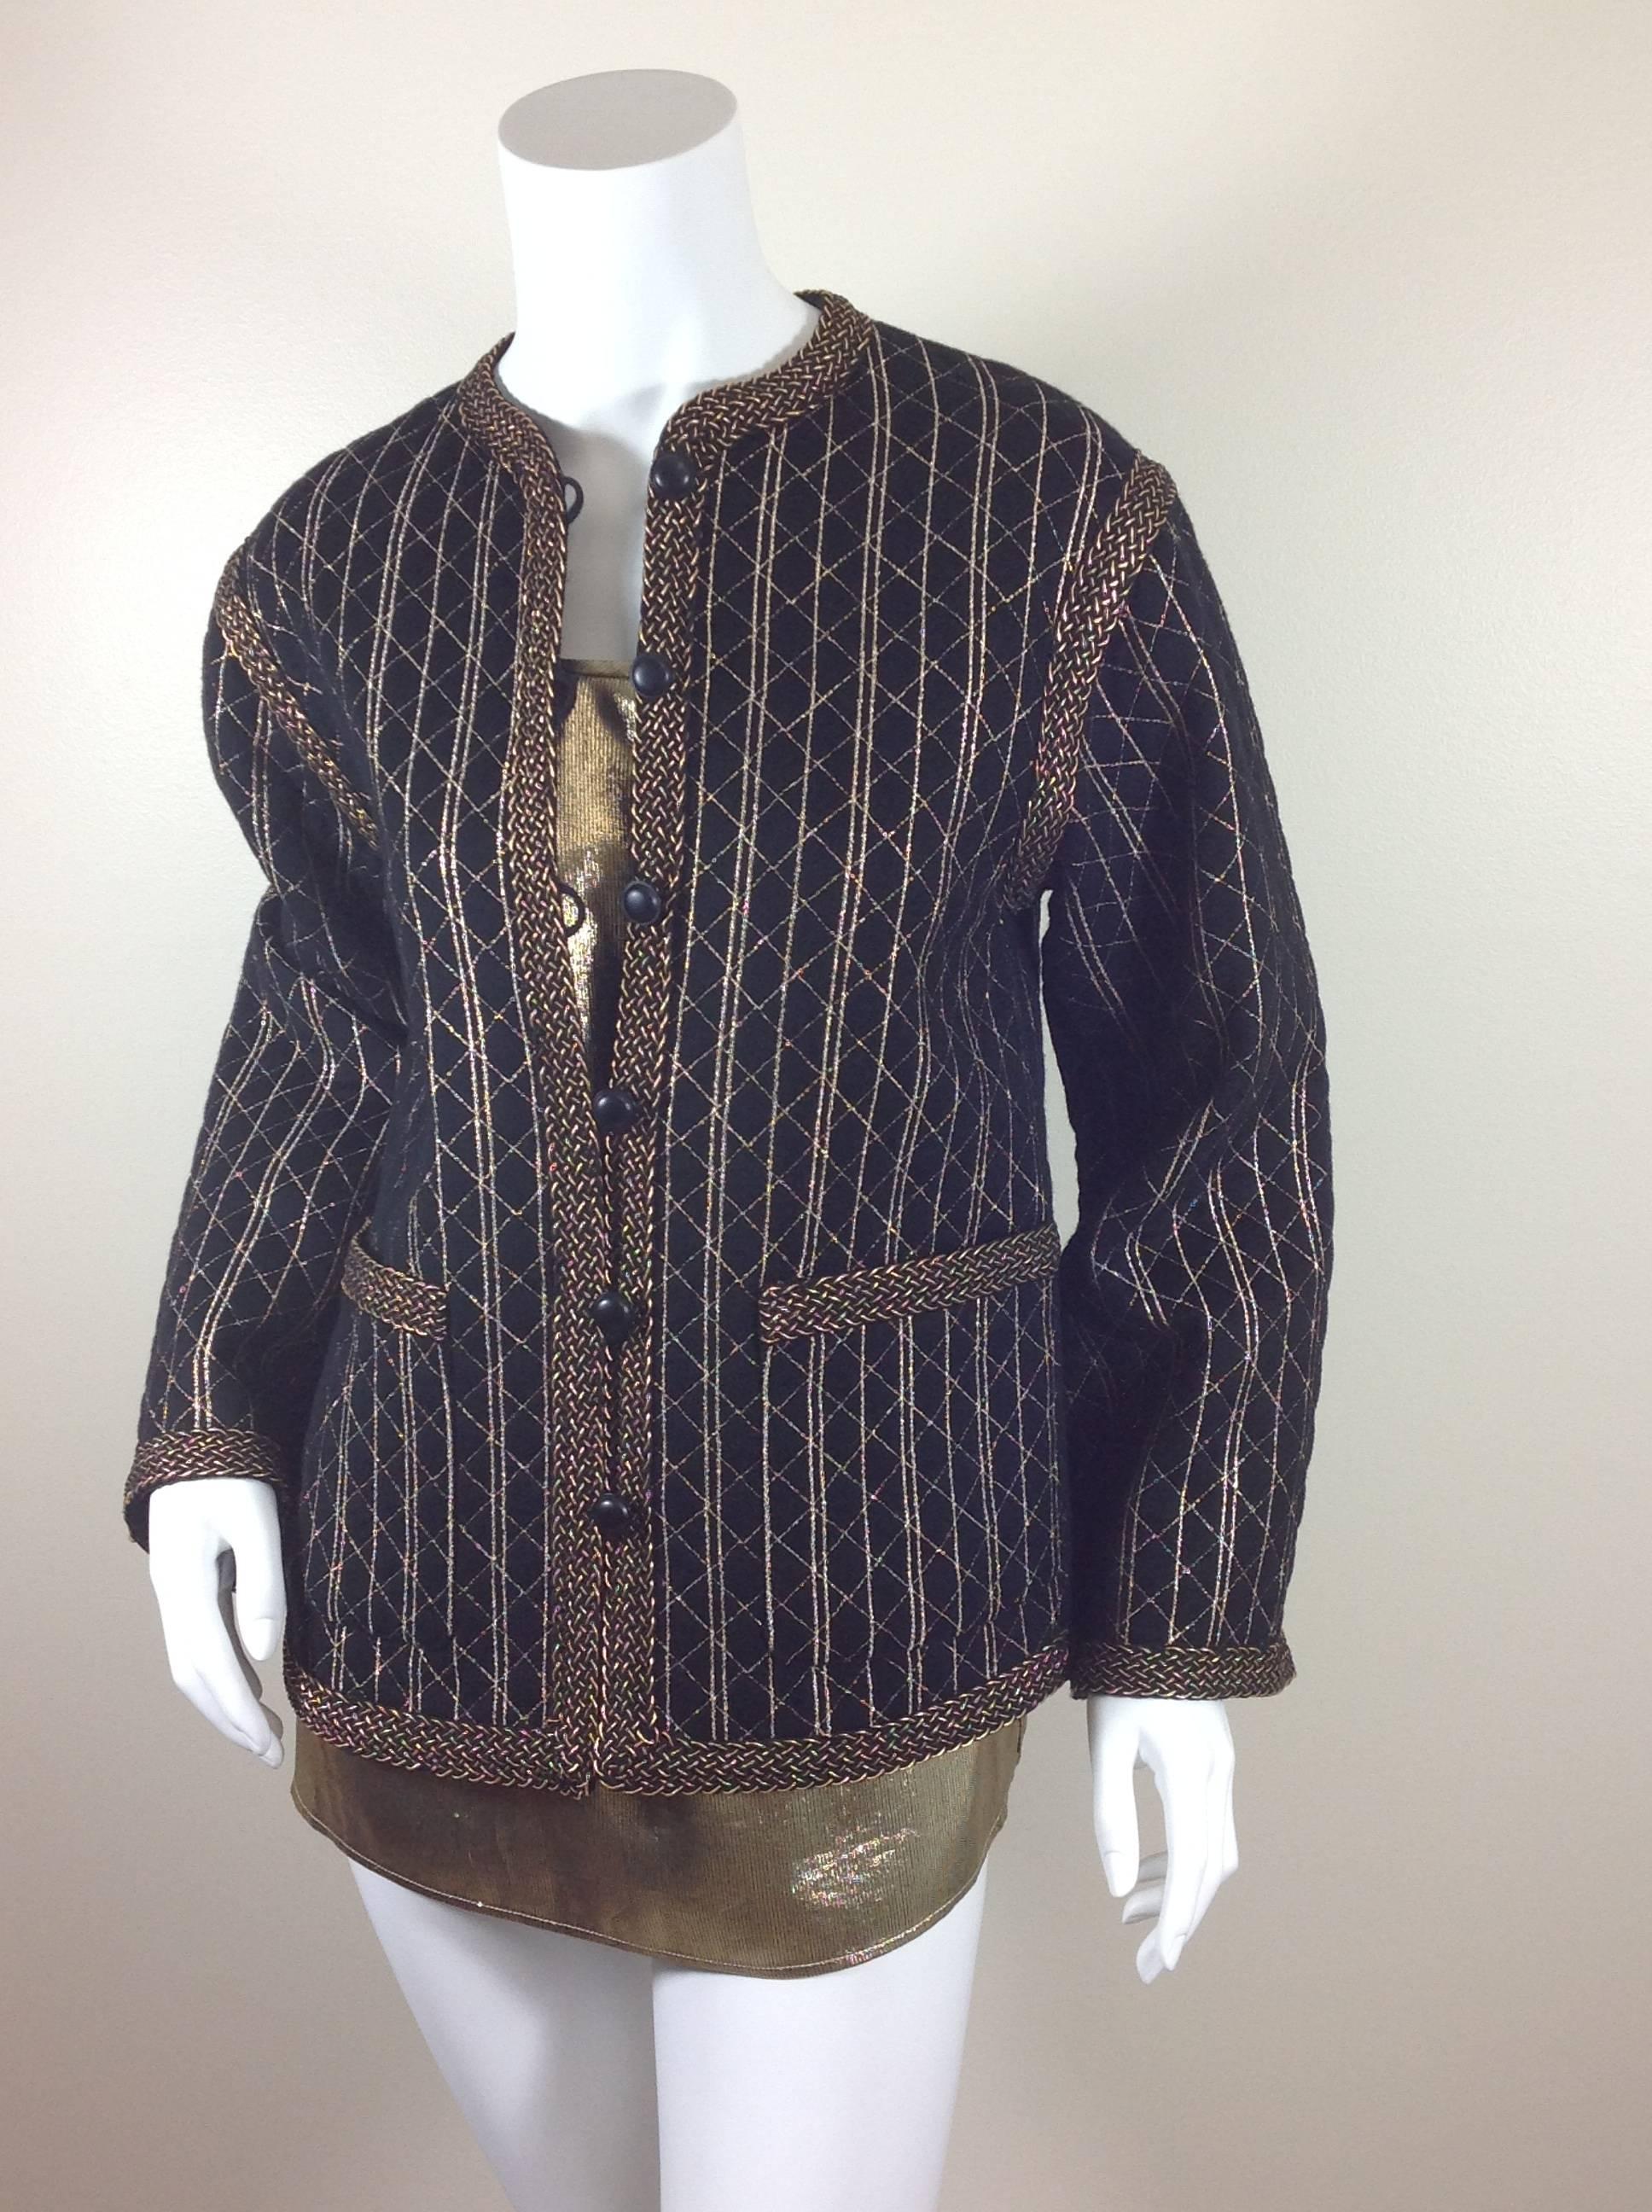 1970's Russian Collection jacket & blouse from Saint Laurent Rive Gauche.
The jacket is soft wool, embroidered with gold metallic thread, in diamonds and stripes.  The jewel neckline, front and bottom of the jacket, shoulders, cuffs and 2 pockets